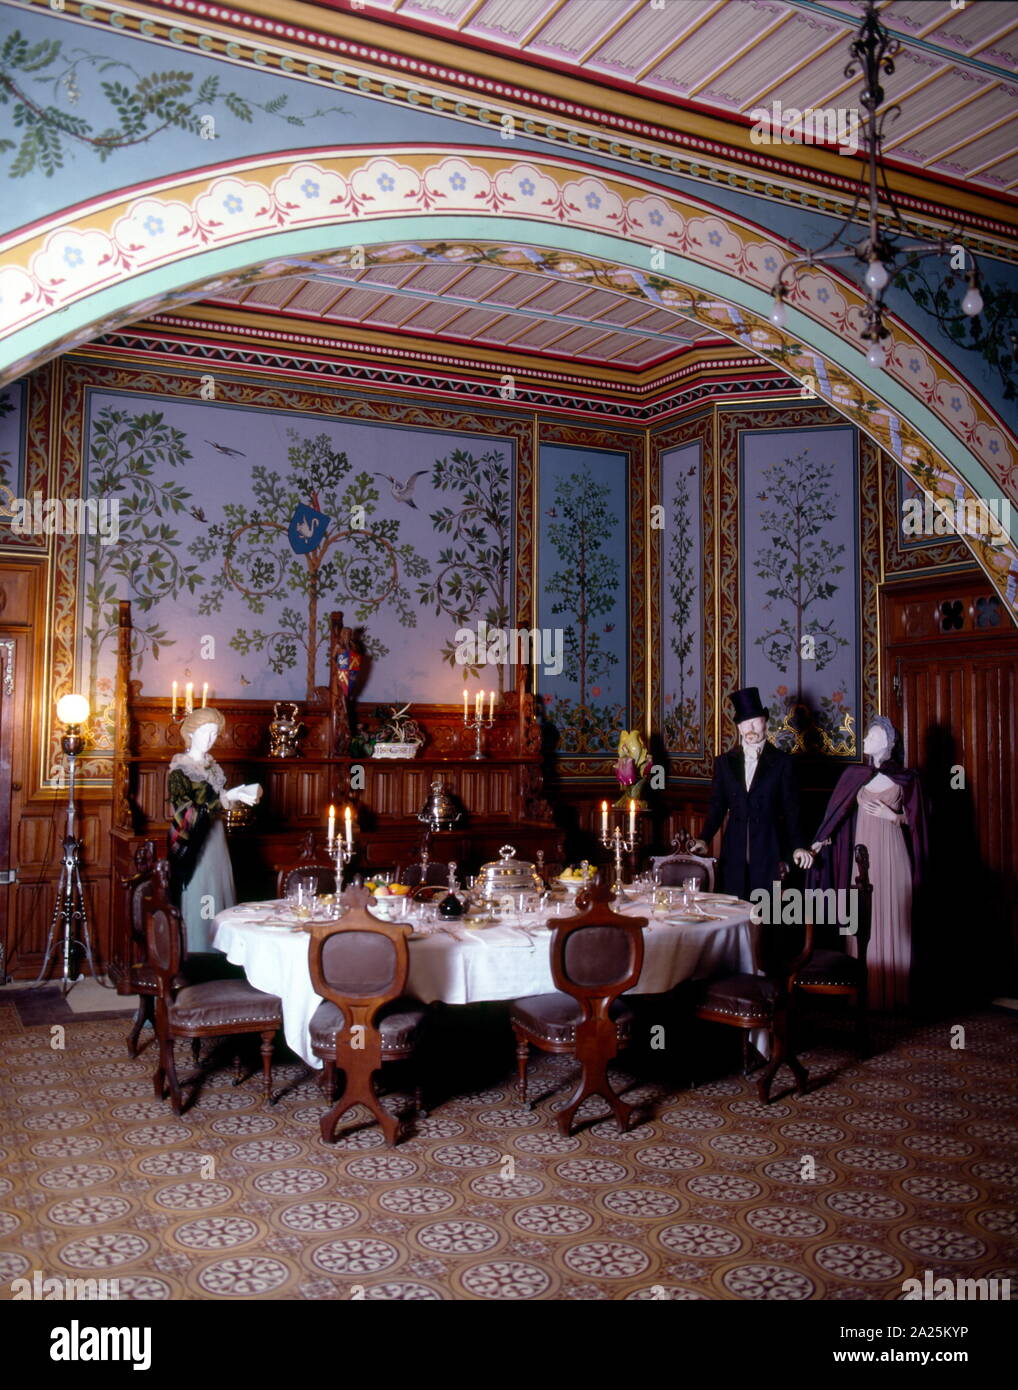 19th century dining room, in the Château de Roquetaillade; a castle in Mazères (near Bordeaux), France. The decor and fittings were supervised by Viollet-le-Duc during the 19th century. Eugène Emmanuel Viollet-le-Duc (1814 – 1879) was a French architect and theorist, famous for his interpretive 'restorations' of medieval buildings Stock Photo